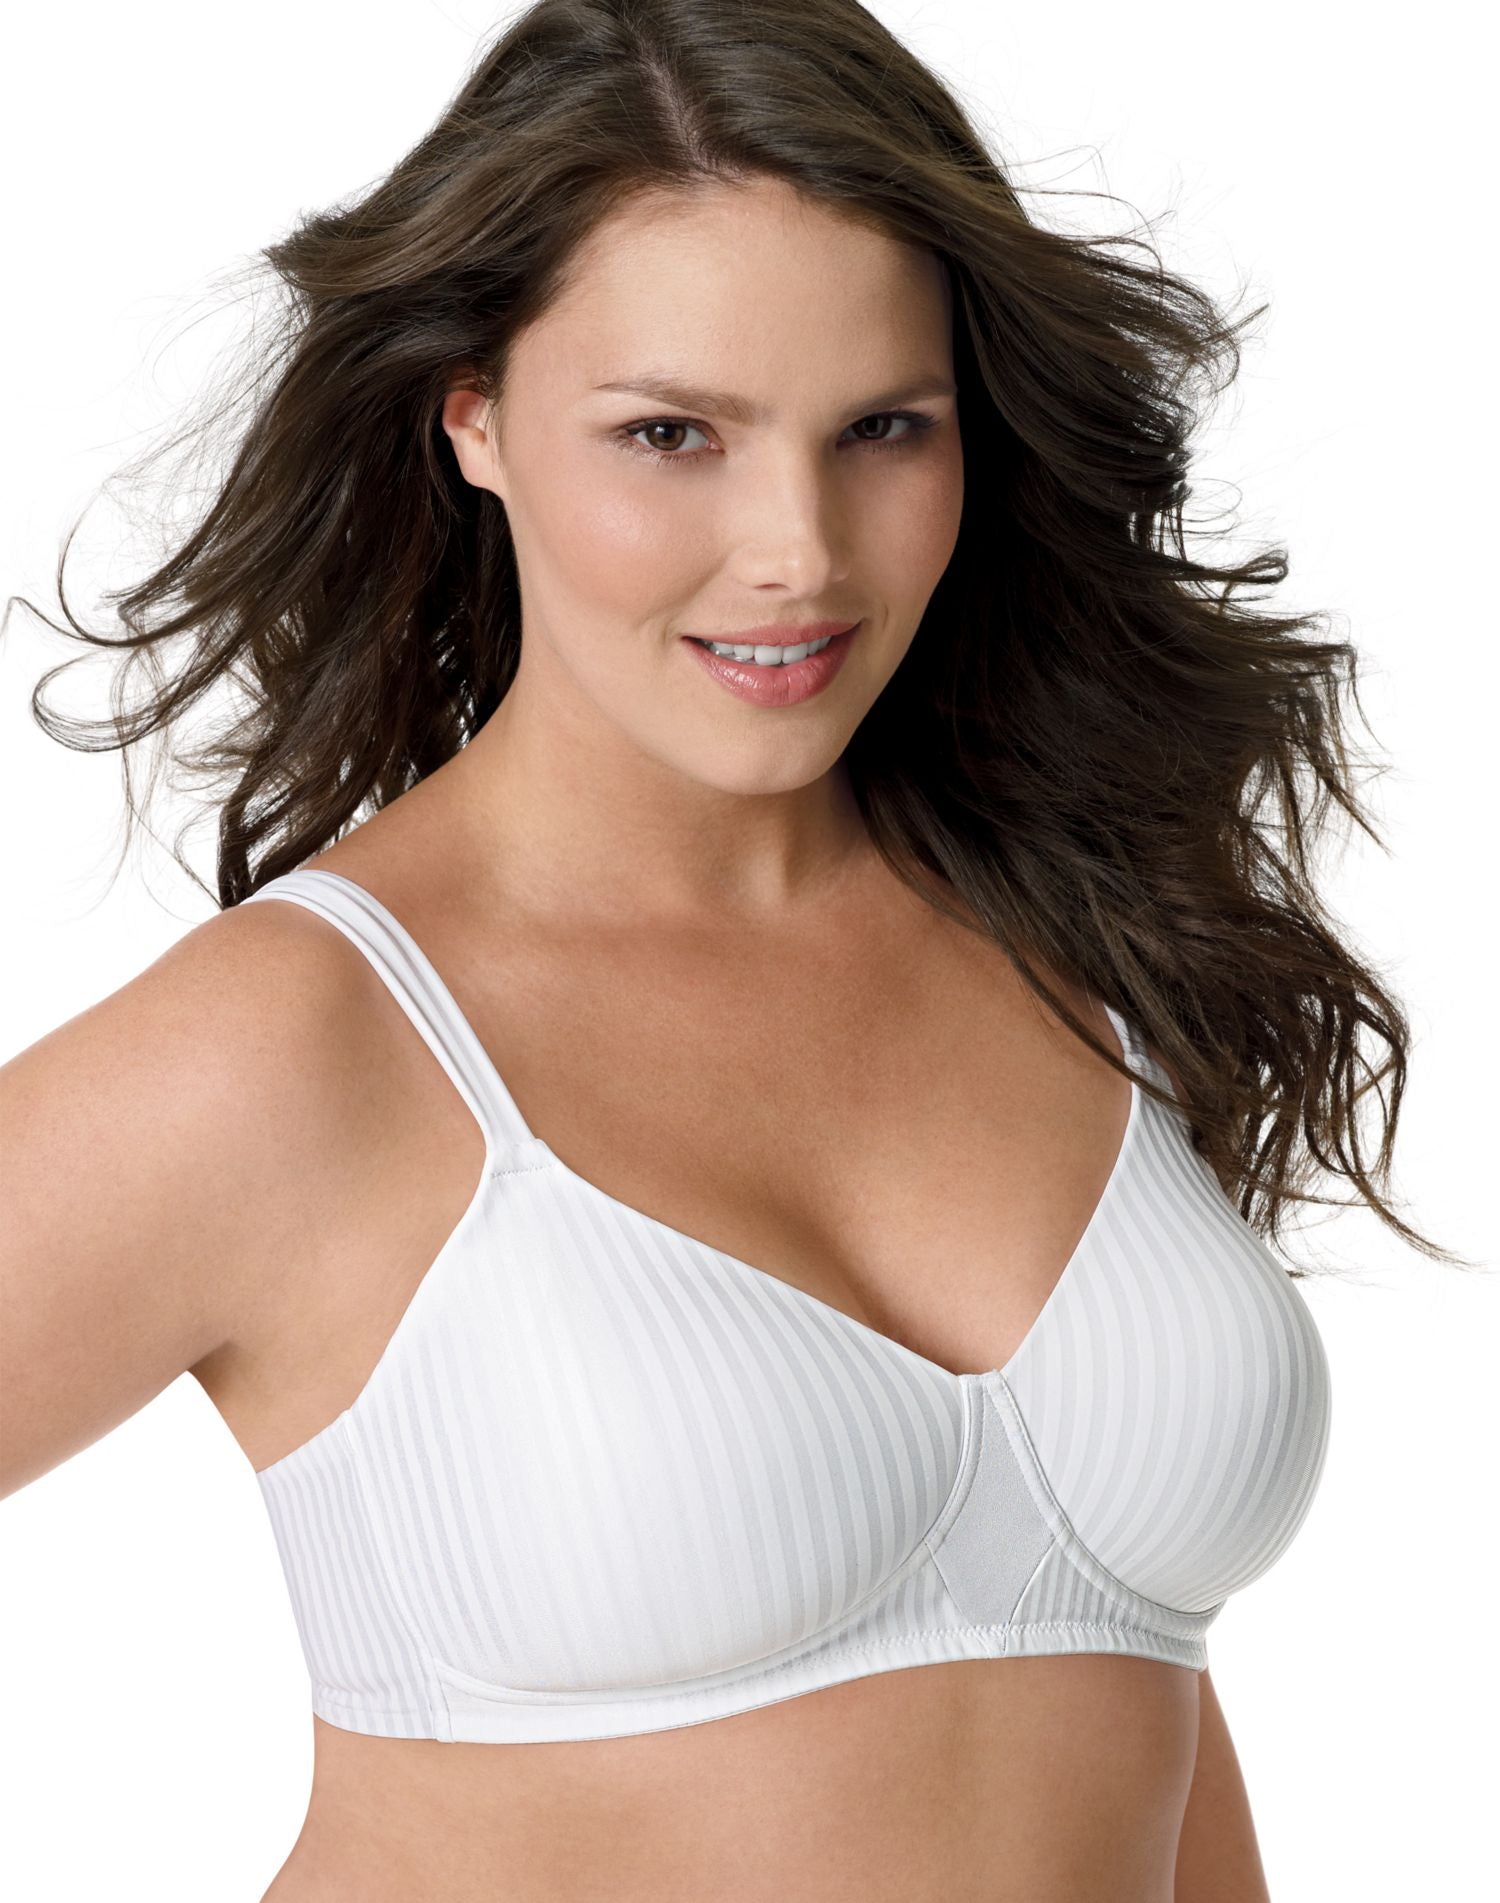 Playtex Secrets All Over Smoothing Full-figure Wirefree Bra Us4707